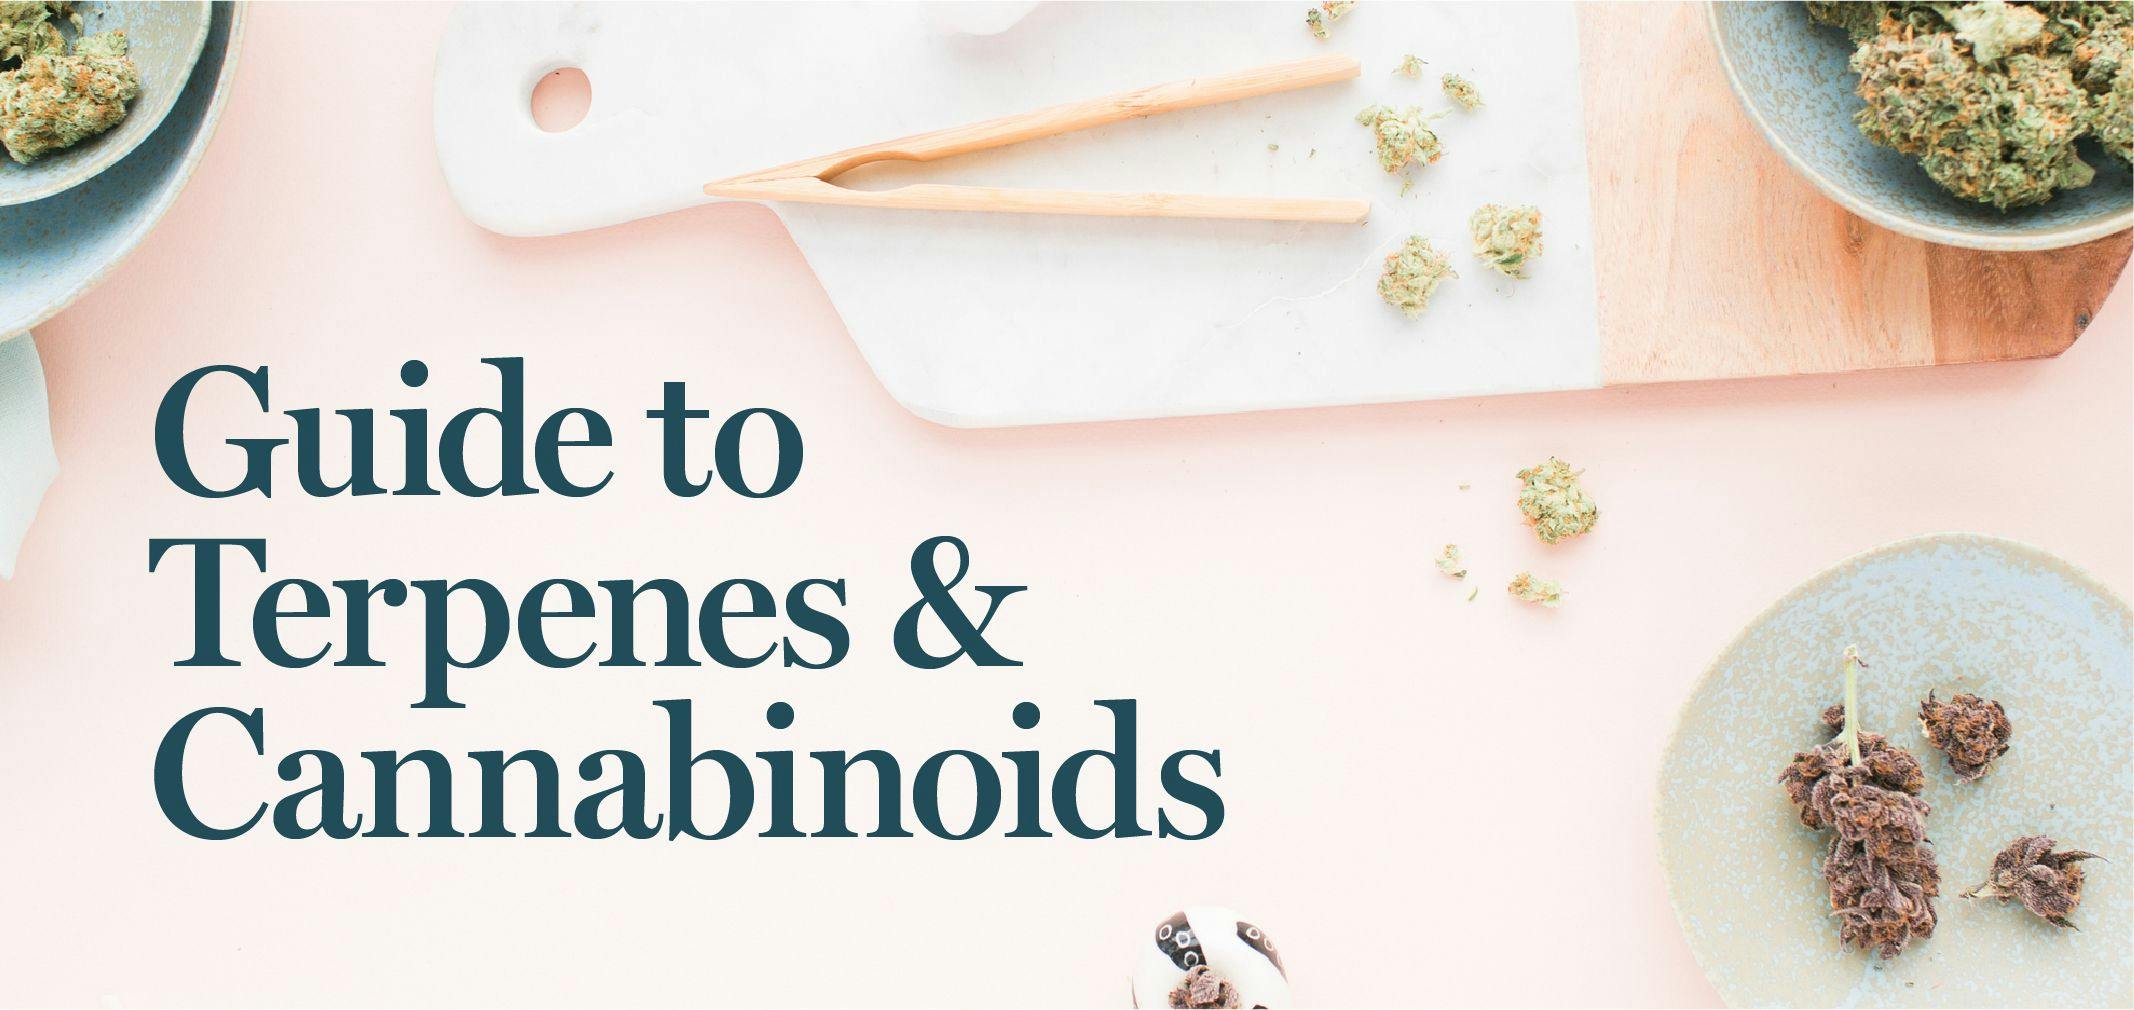 Curaleaf’s Guide to Terpenes and Cannabinoids